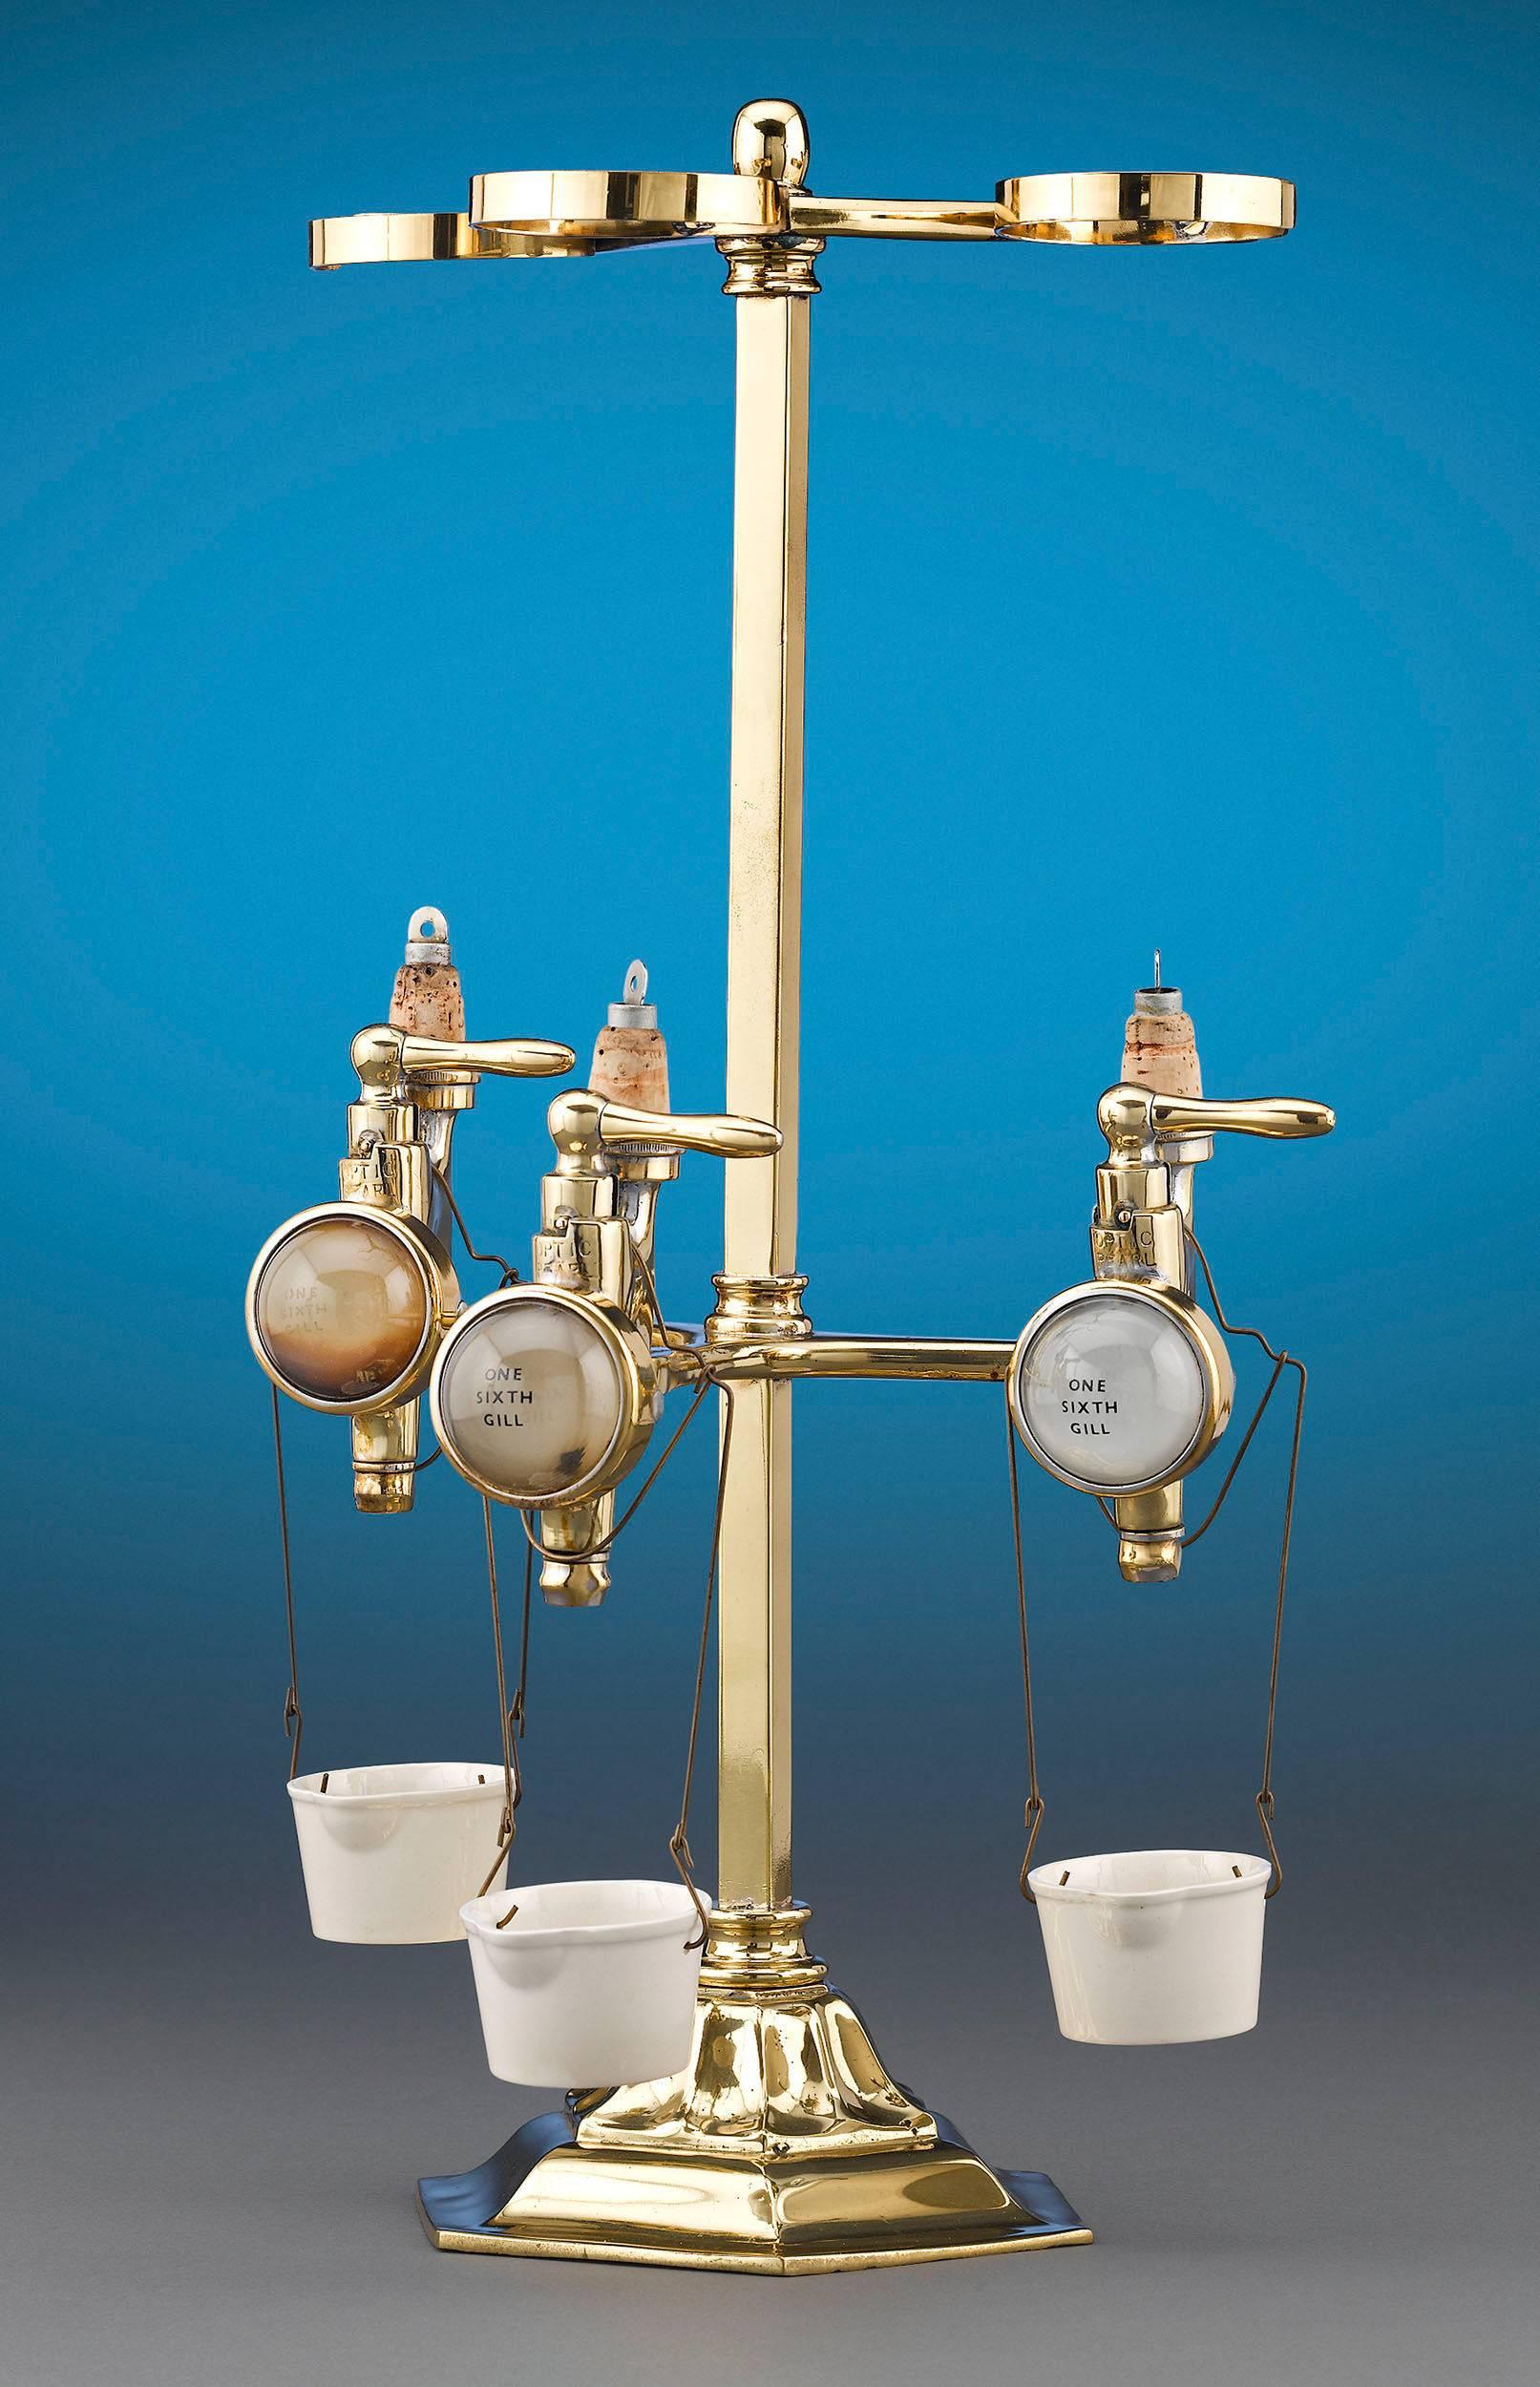 This set of three non-drip drink dispenser measures was a must have for any professional bar. Also known as optics due to their resemblance to optical lenses, these gravity-fed dispensers took any guesswork out of dispensing the correct amount of